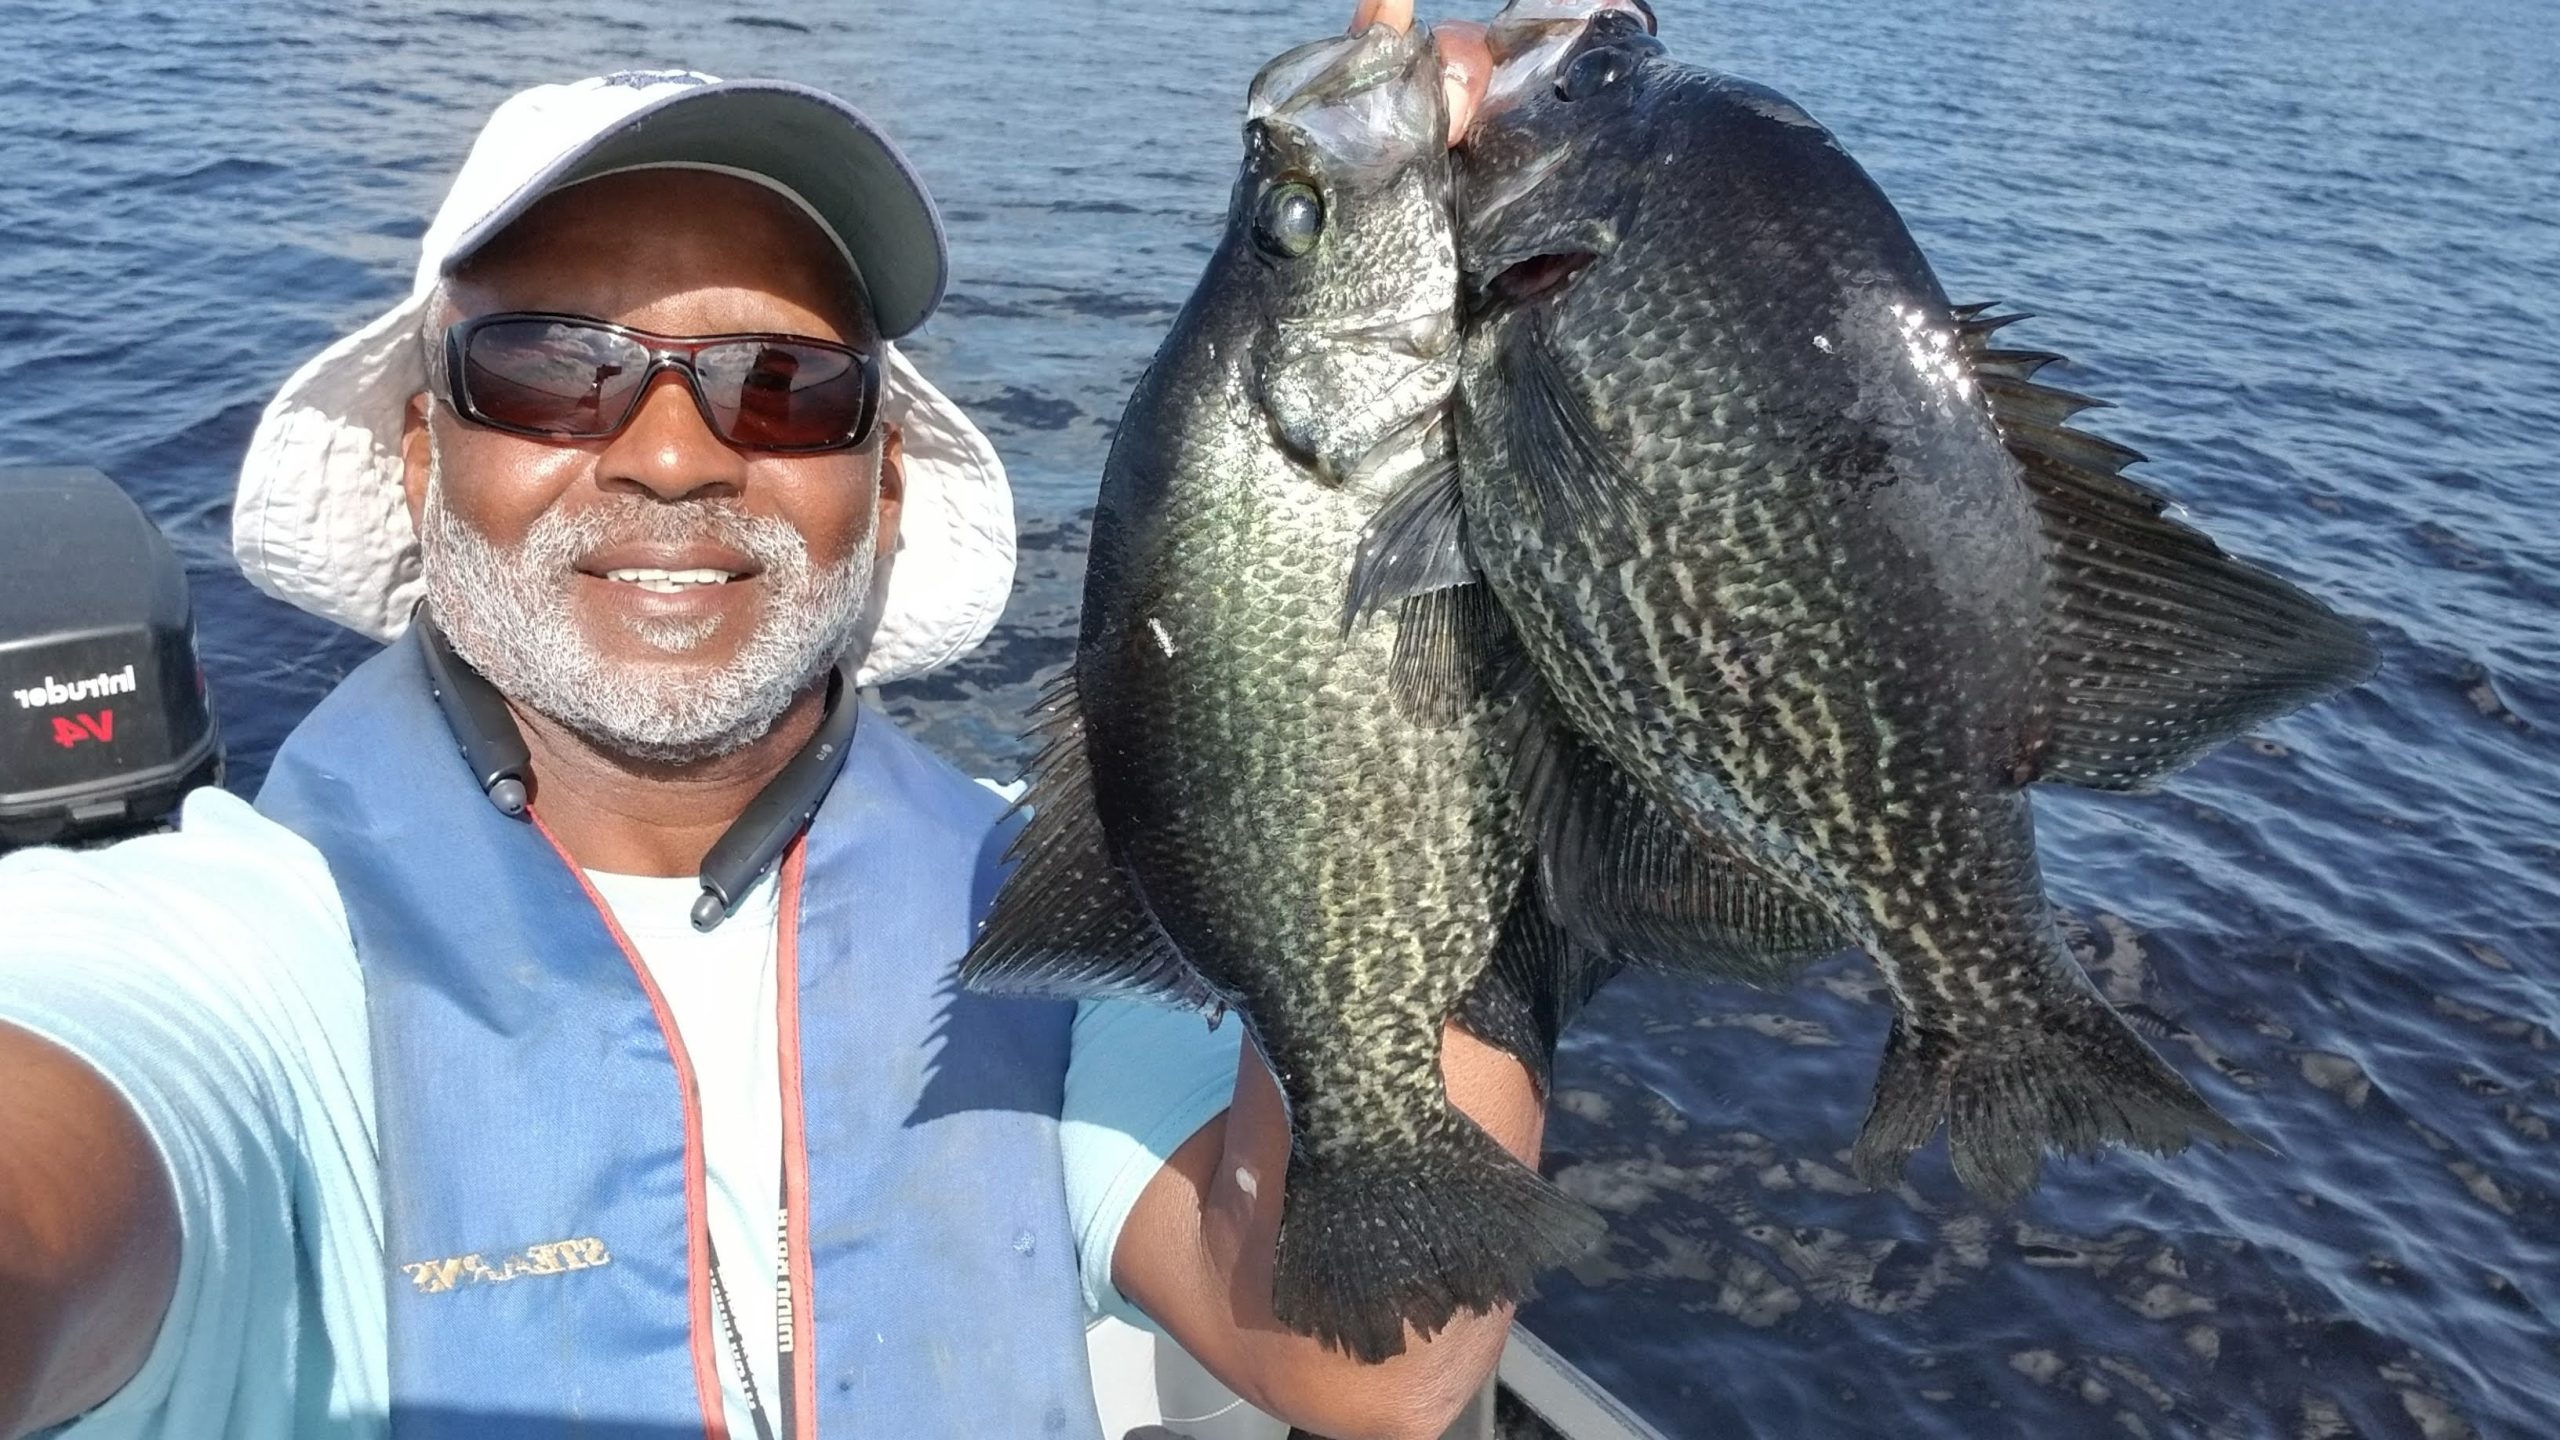 Crappie Authority Guided Fishing Trip